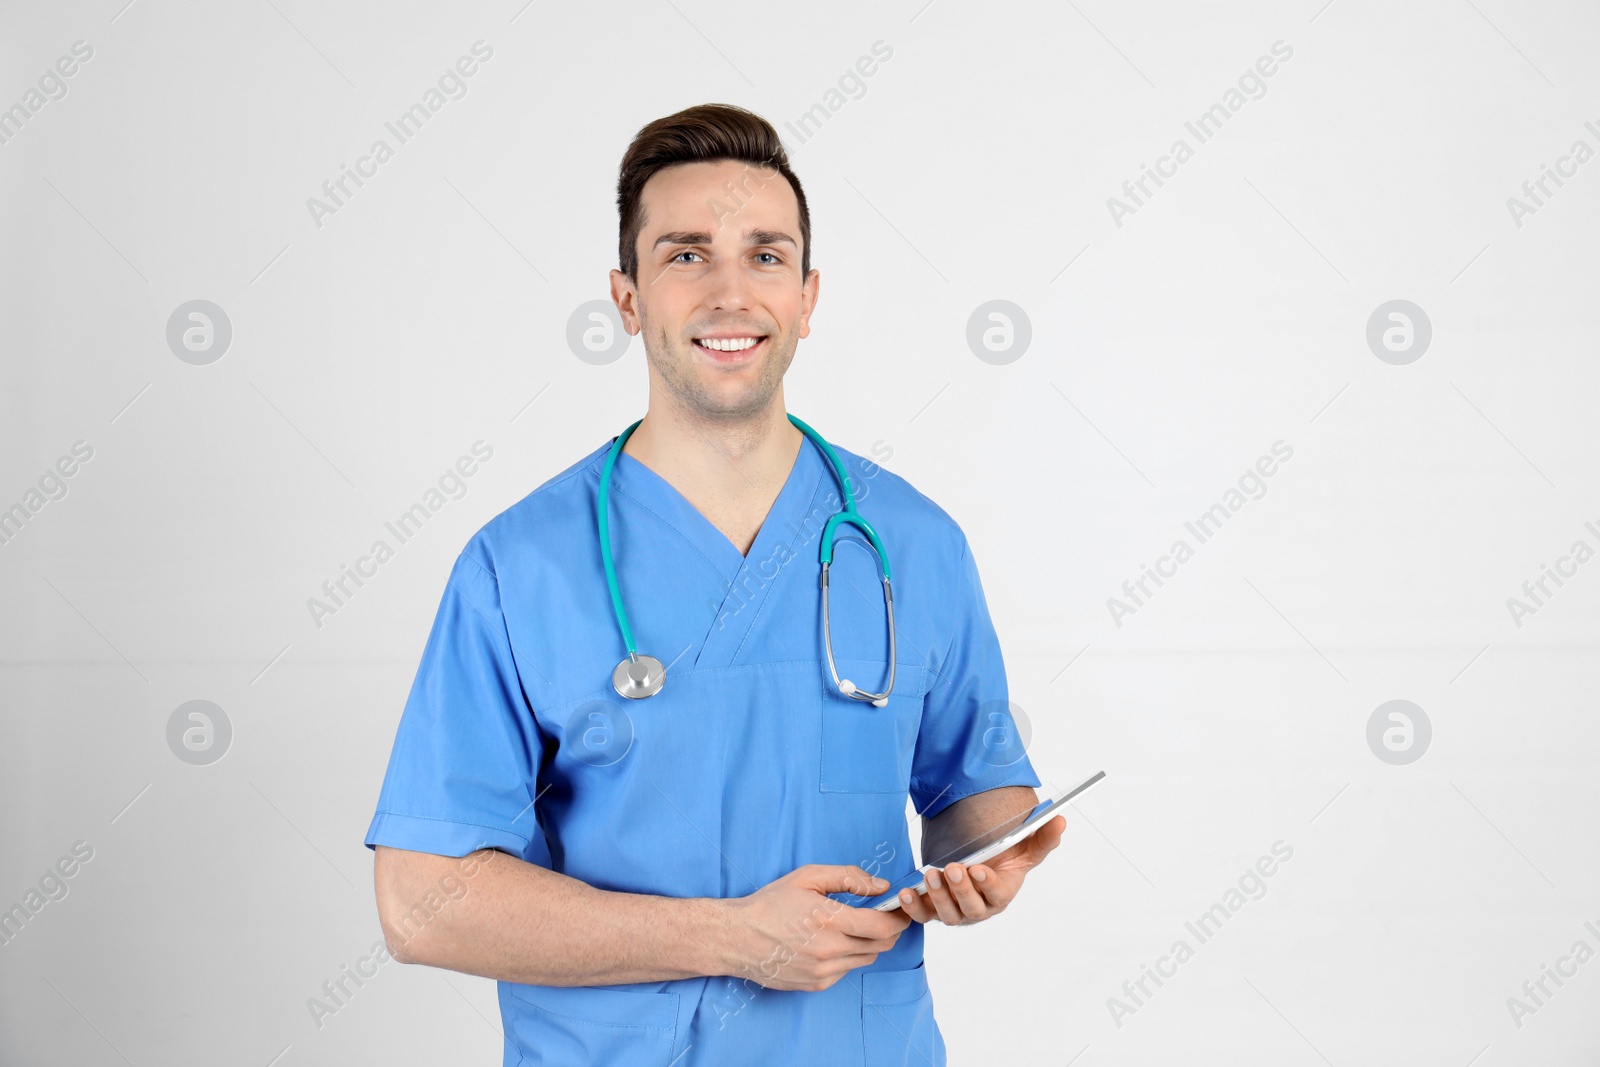 Photo of Portrait of medical assistant with stethoscope and tablet on light background